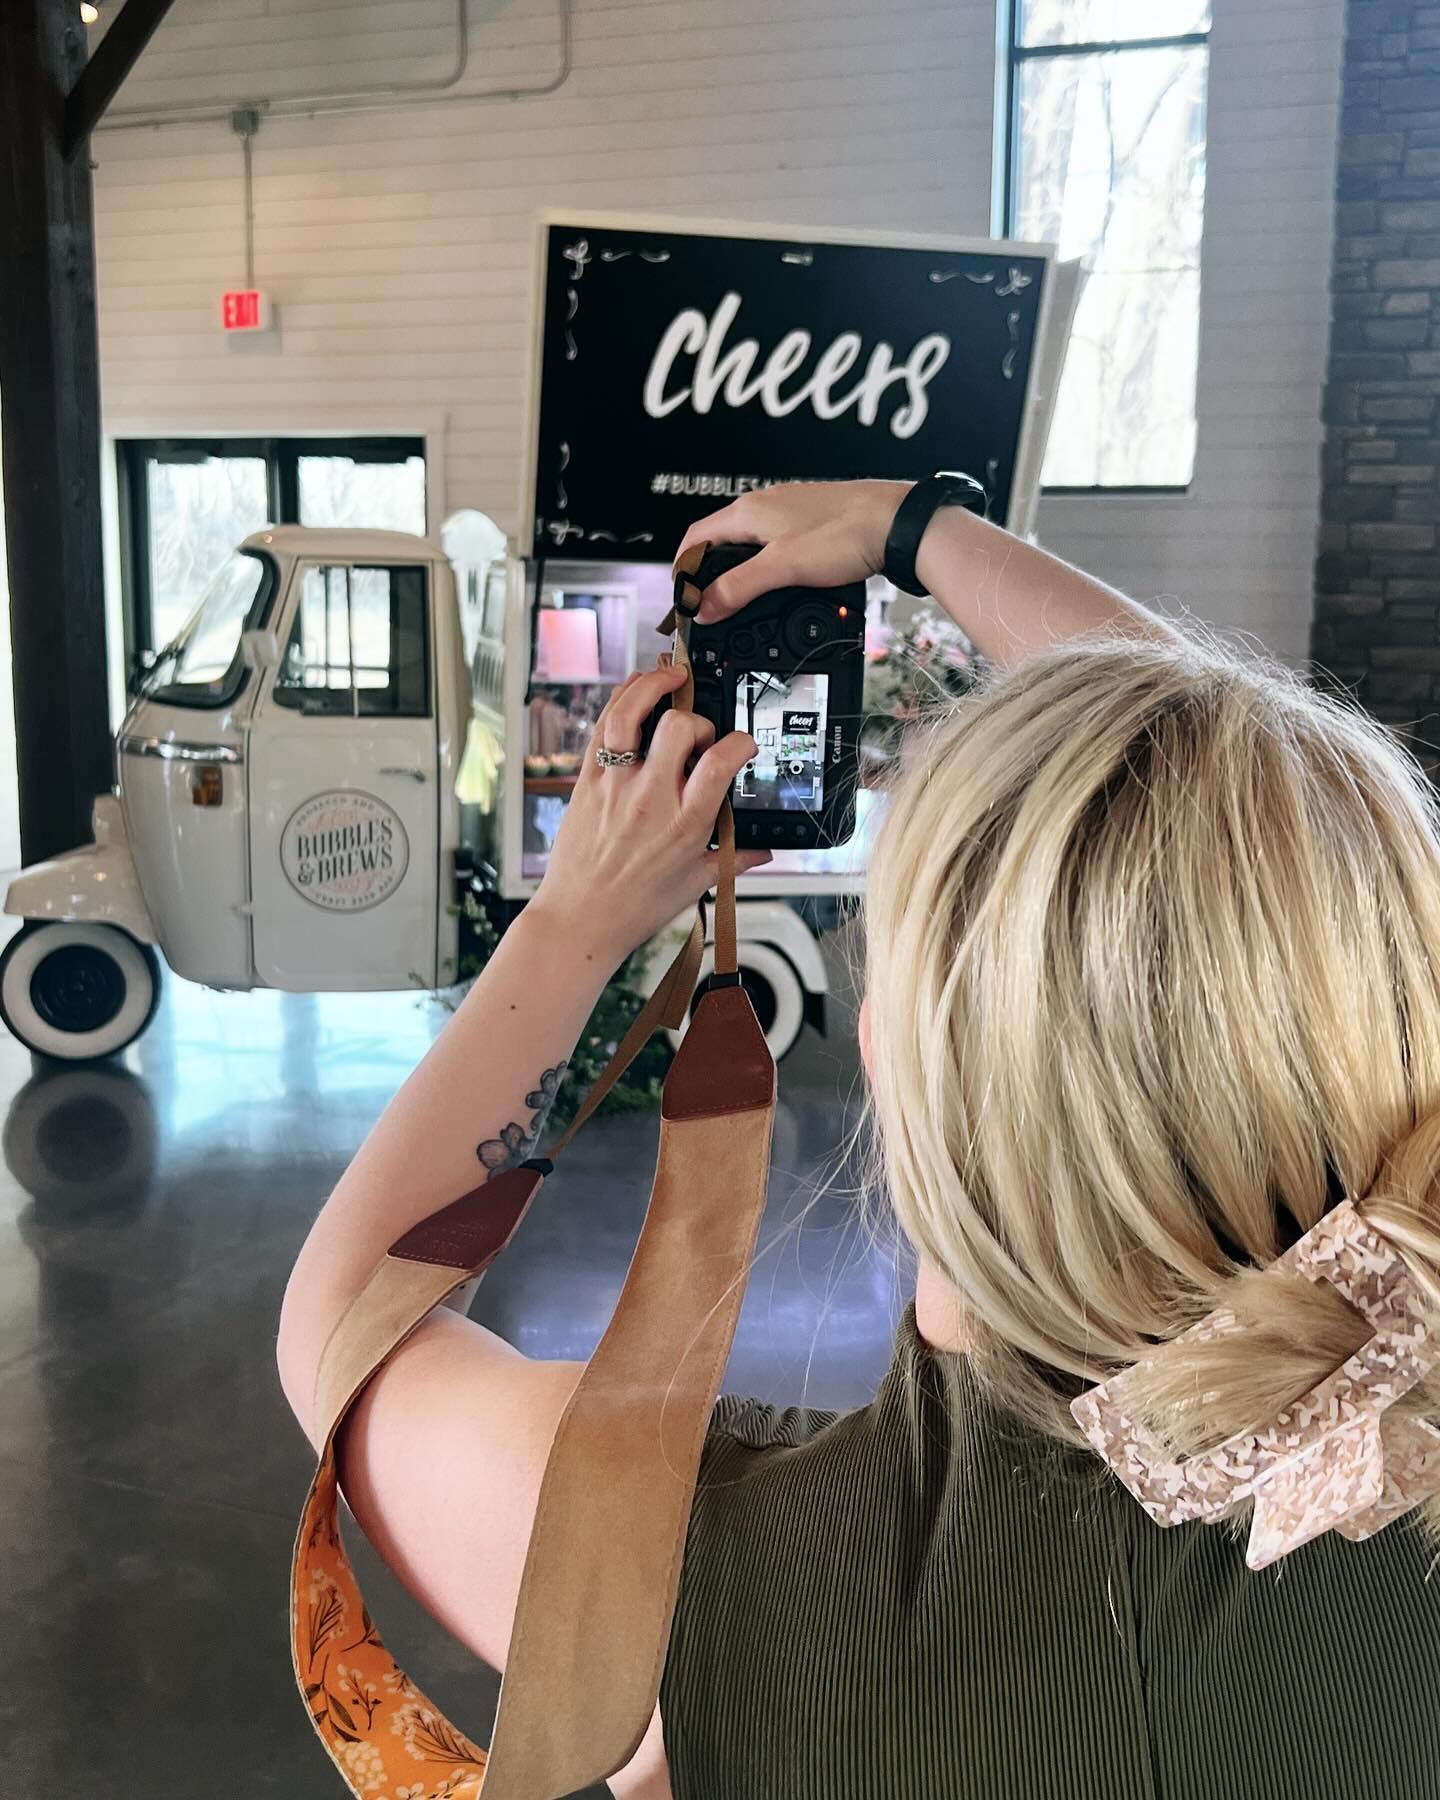 Looking forward to another weekend of seeing @rachelkost.photo behind the camera and @minibloomsbyemil florals decorating our mobile bar at Black Leg Ranch 🌸📸🥂

This weekends&rsquo; menu: 

🍺 Bison Light by @blacklegbrewery 
🍋&zwj;🟩 Strawberry 